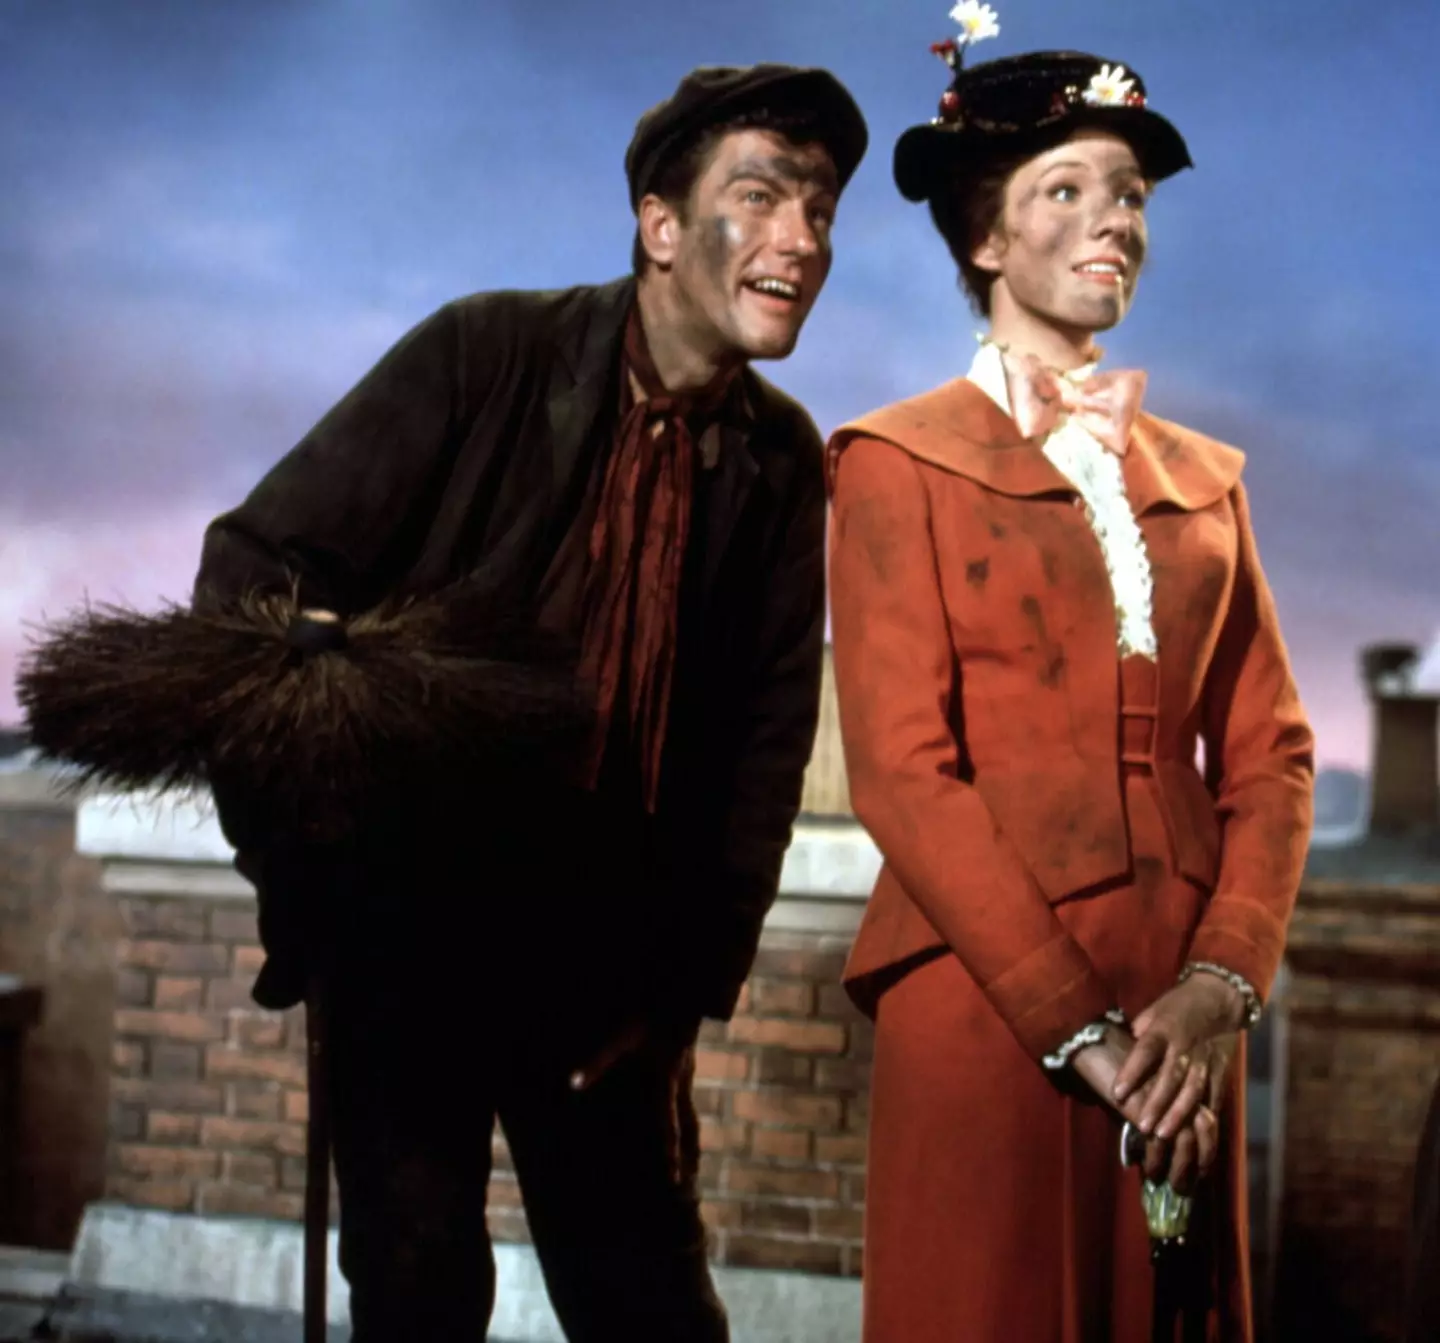 Dick Van Dyke and Julie Andrews in Mary Poppins.